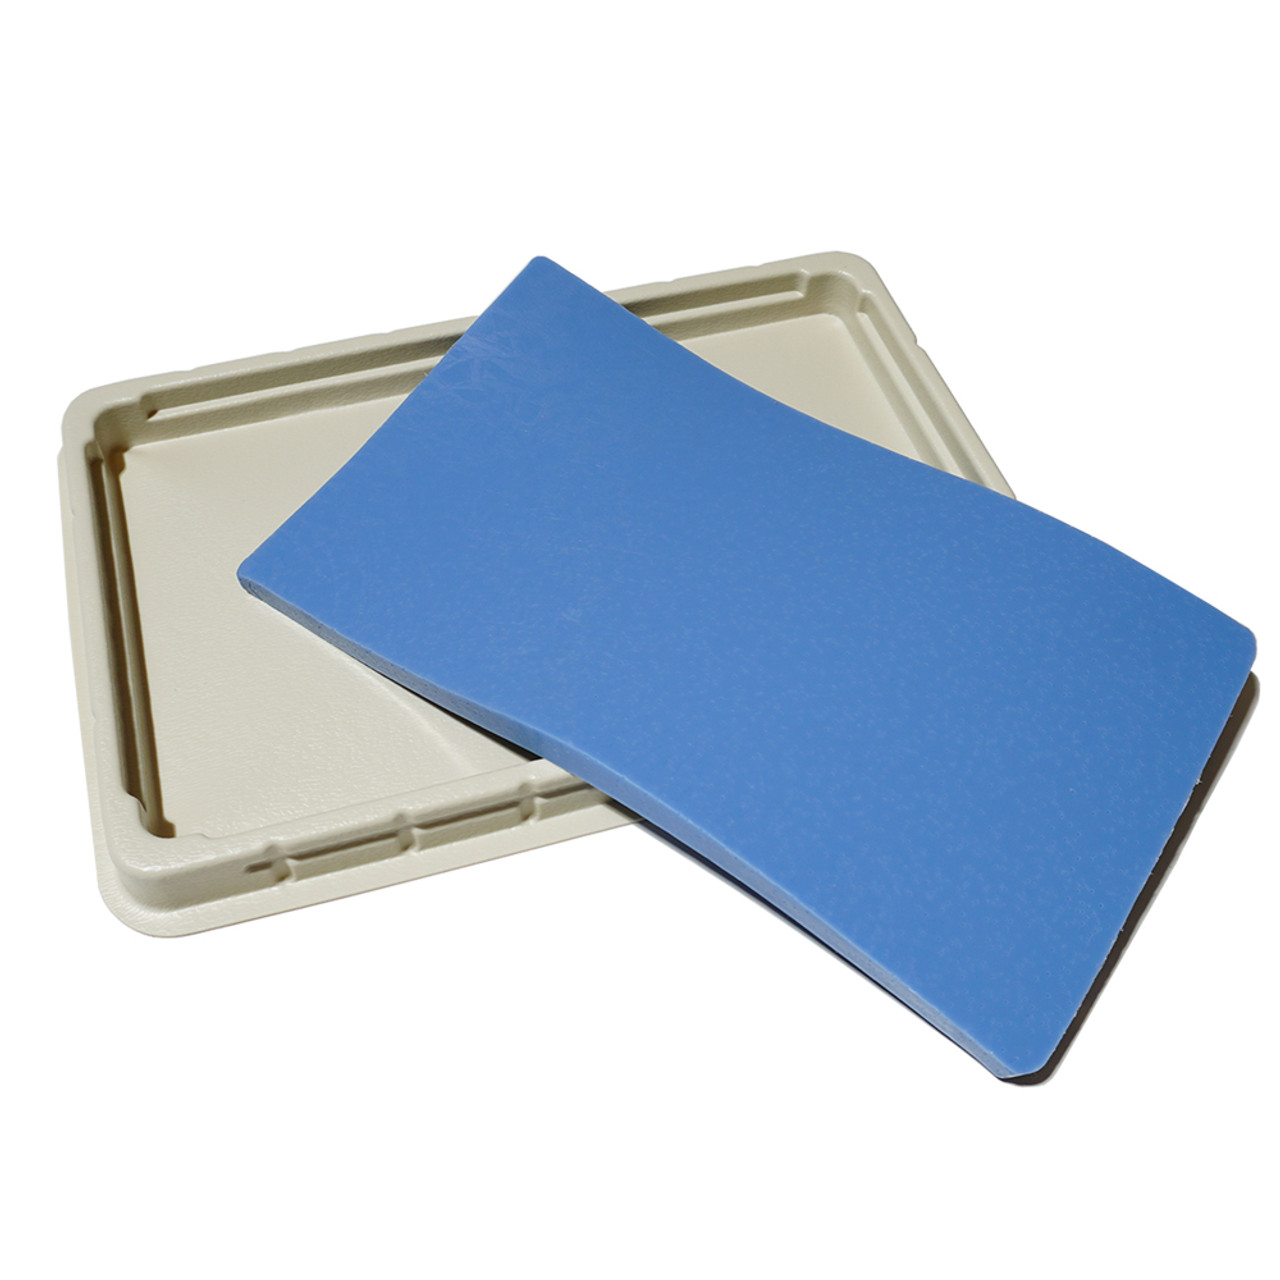 Dissecting Pans with Blue Flex Pads